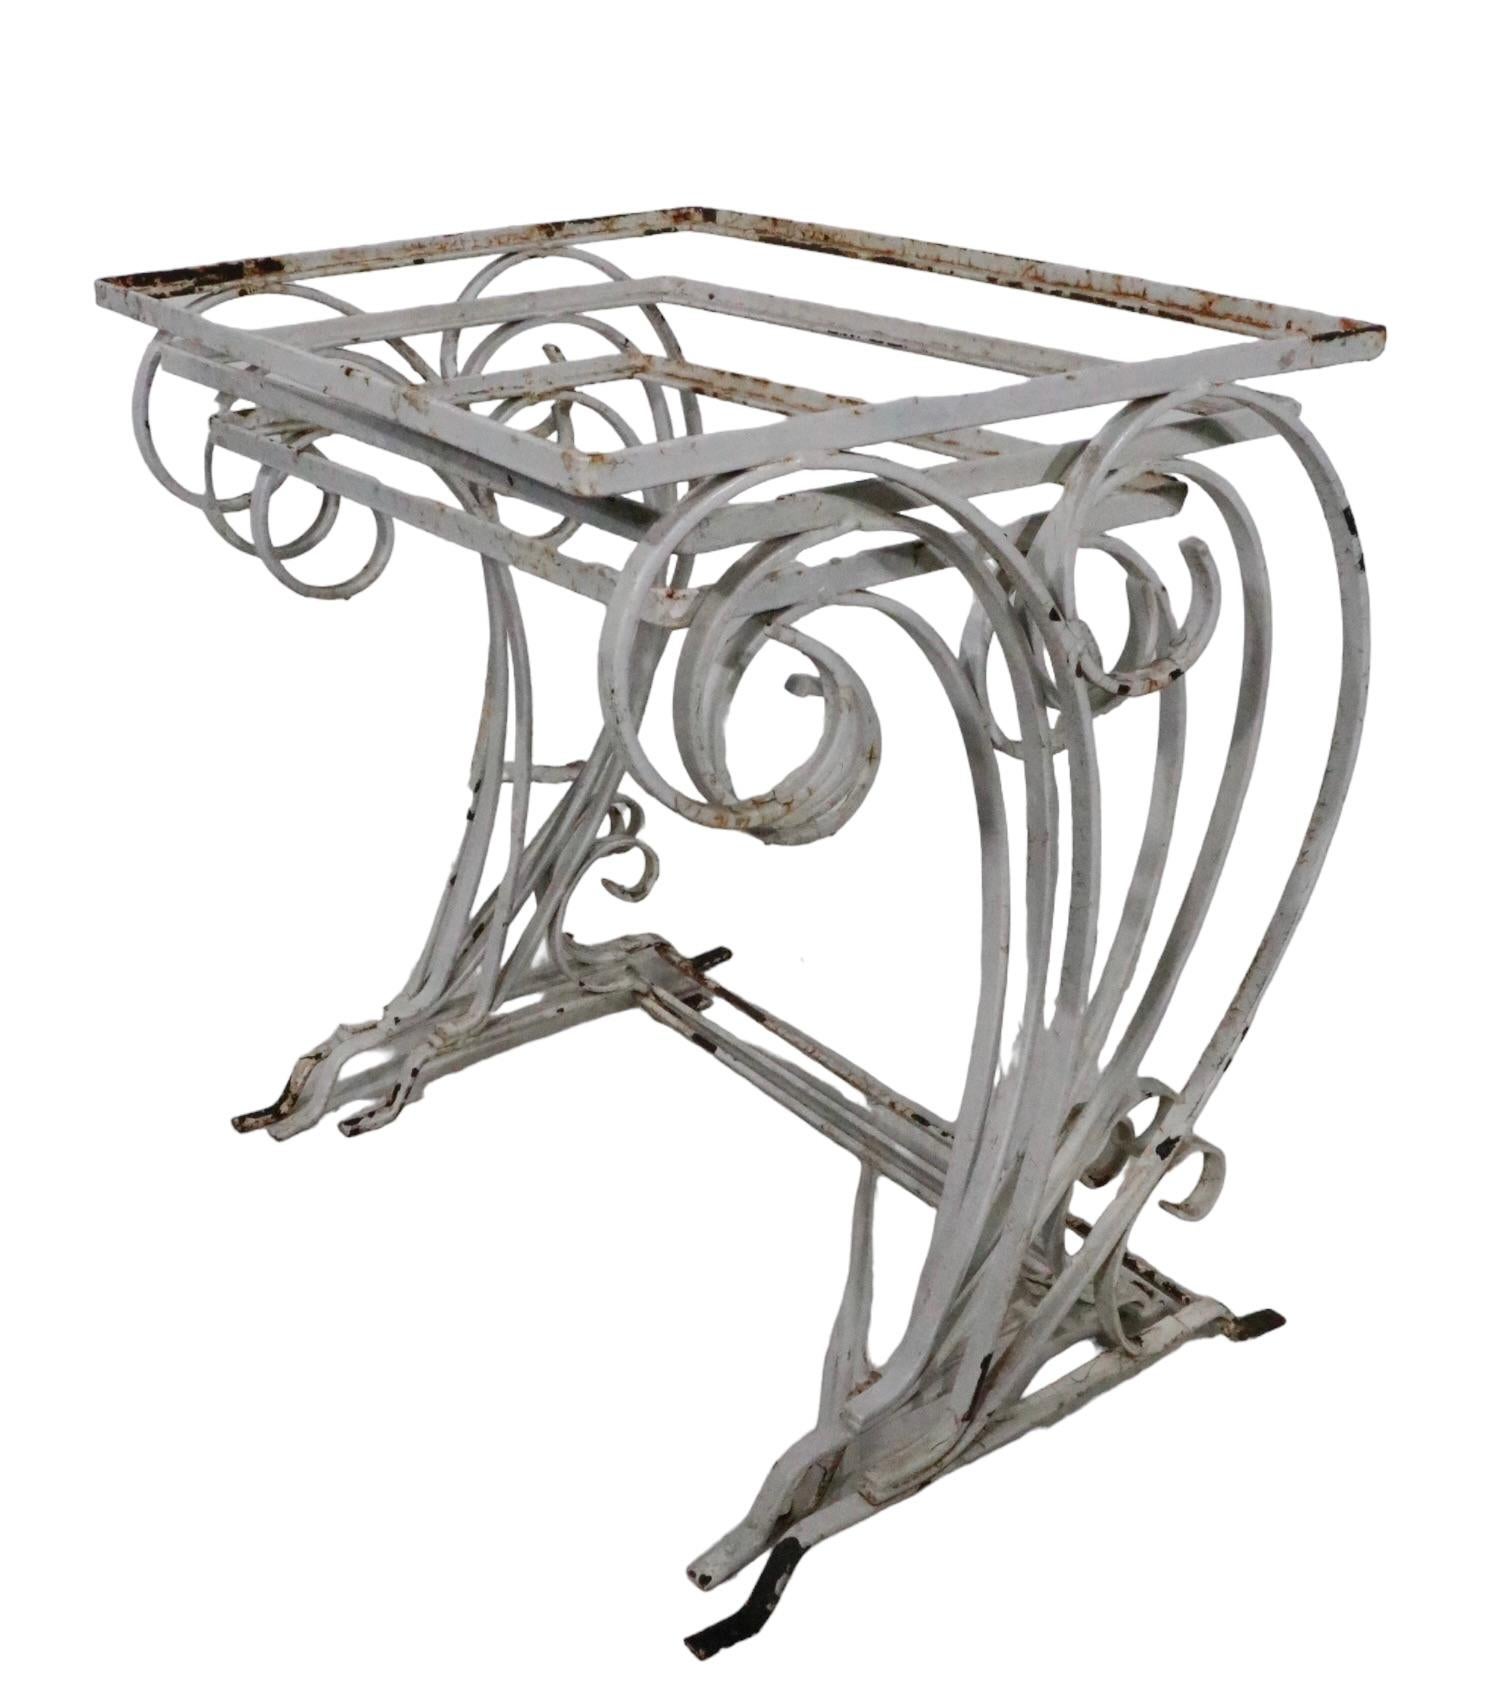 Nest of 3 Art Deco Mid Century Wrought Iron Patio Garden Tables by Salterini In Good Condition For Sale In New York, NY